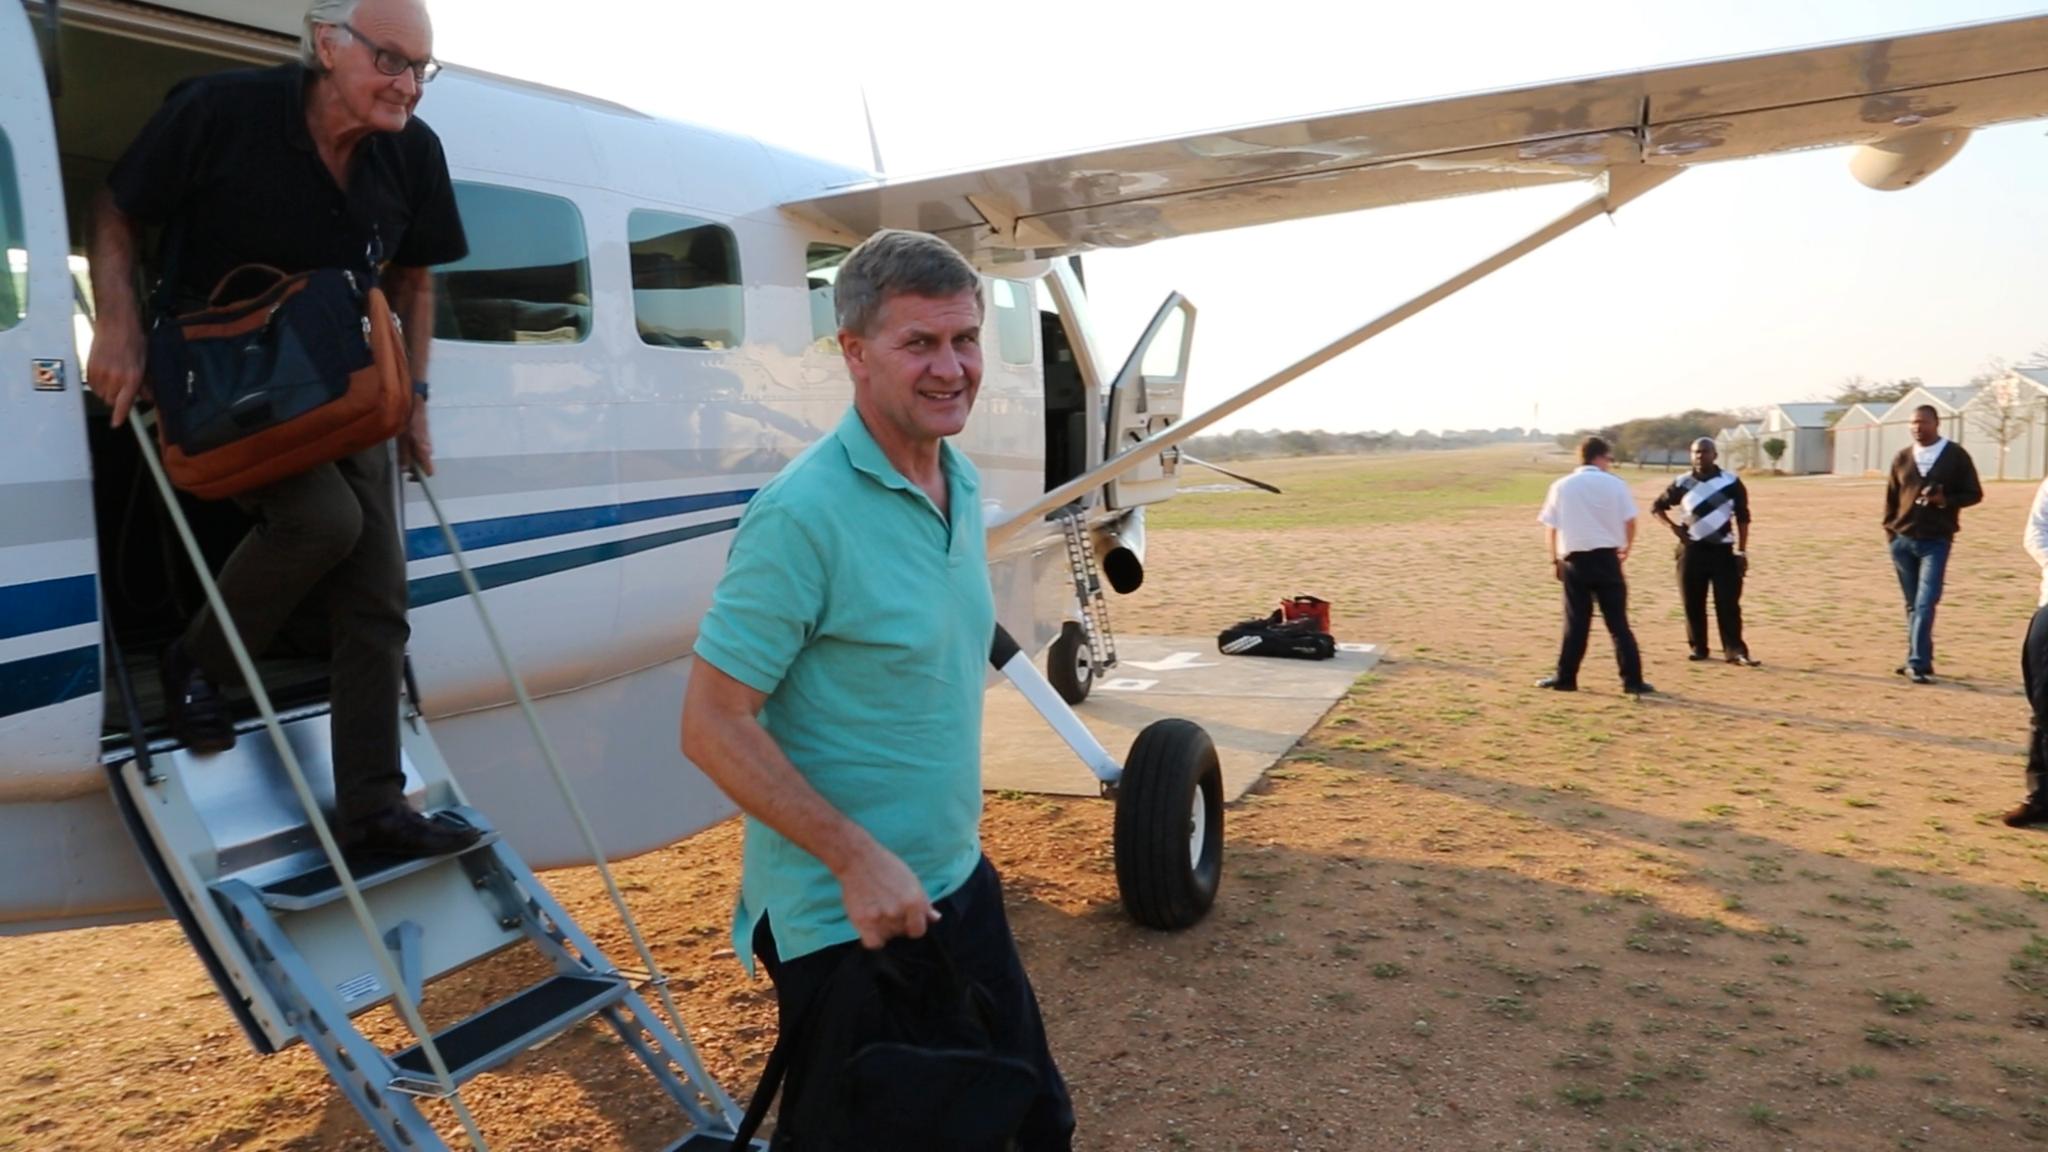 Solheim travelled for 529 days during his first 22 months as head of the UN environmental programme. Here he is in South Africa in september 2016.